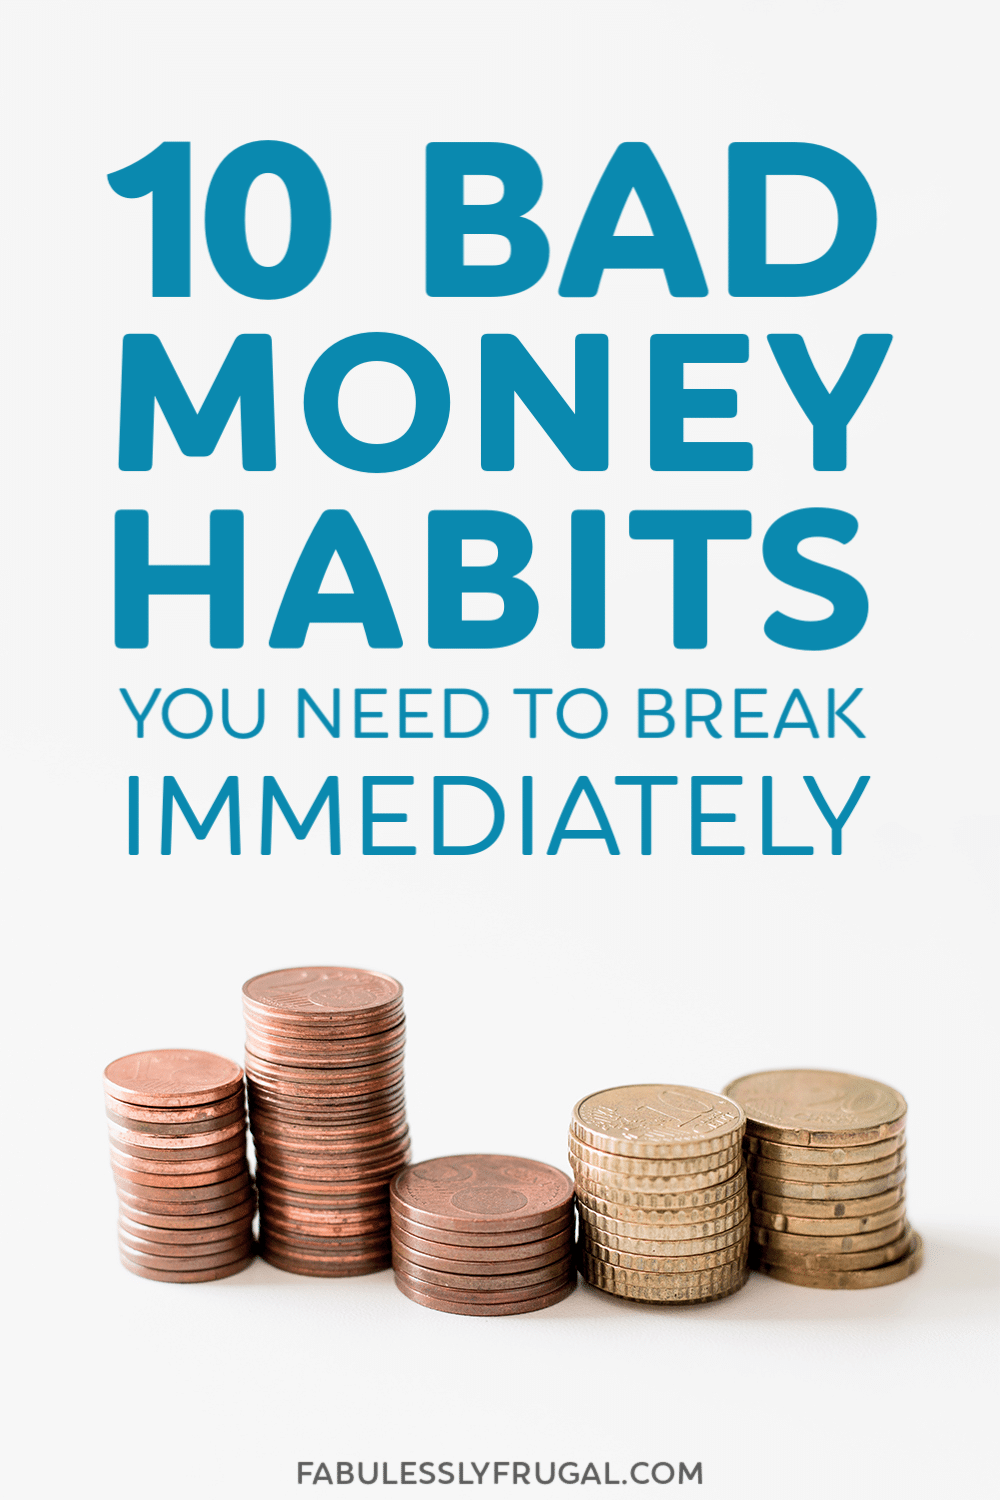 Bad money habits that are keeping you broke